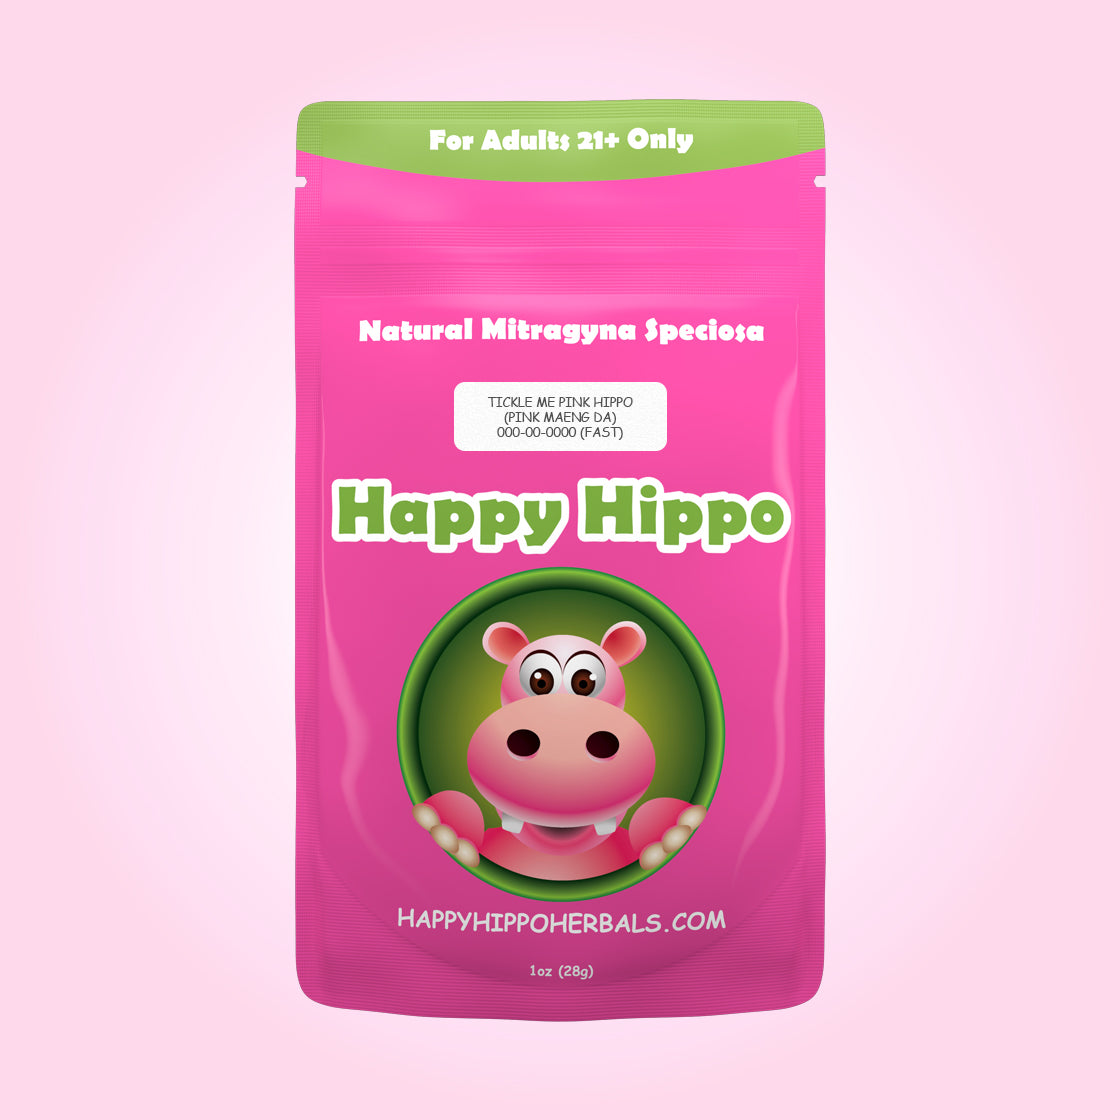 Product Image depicting a 1oz bag of Happy Hippo Pink (Blended Red and White Maeng Da) Maeng Da Kratom Powder (Mitragyna Speciosa).